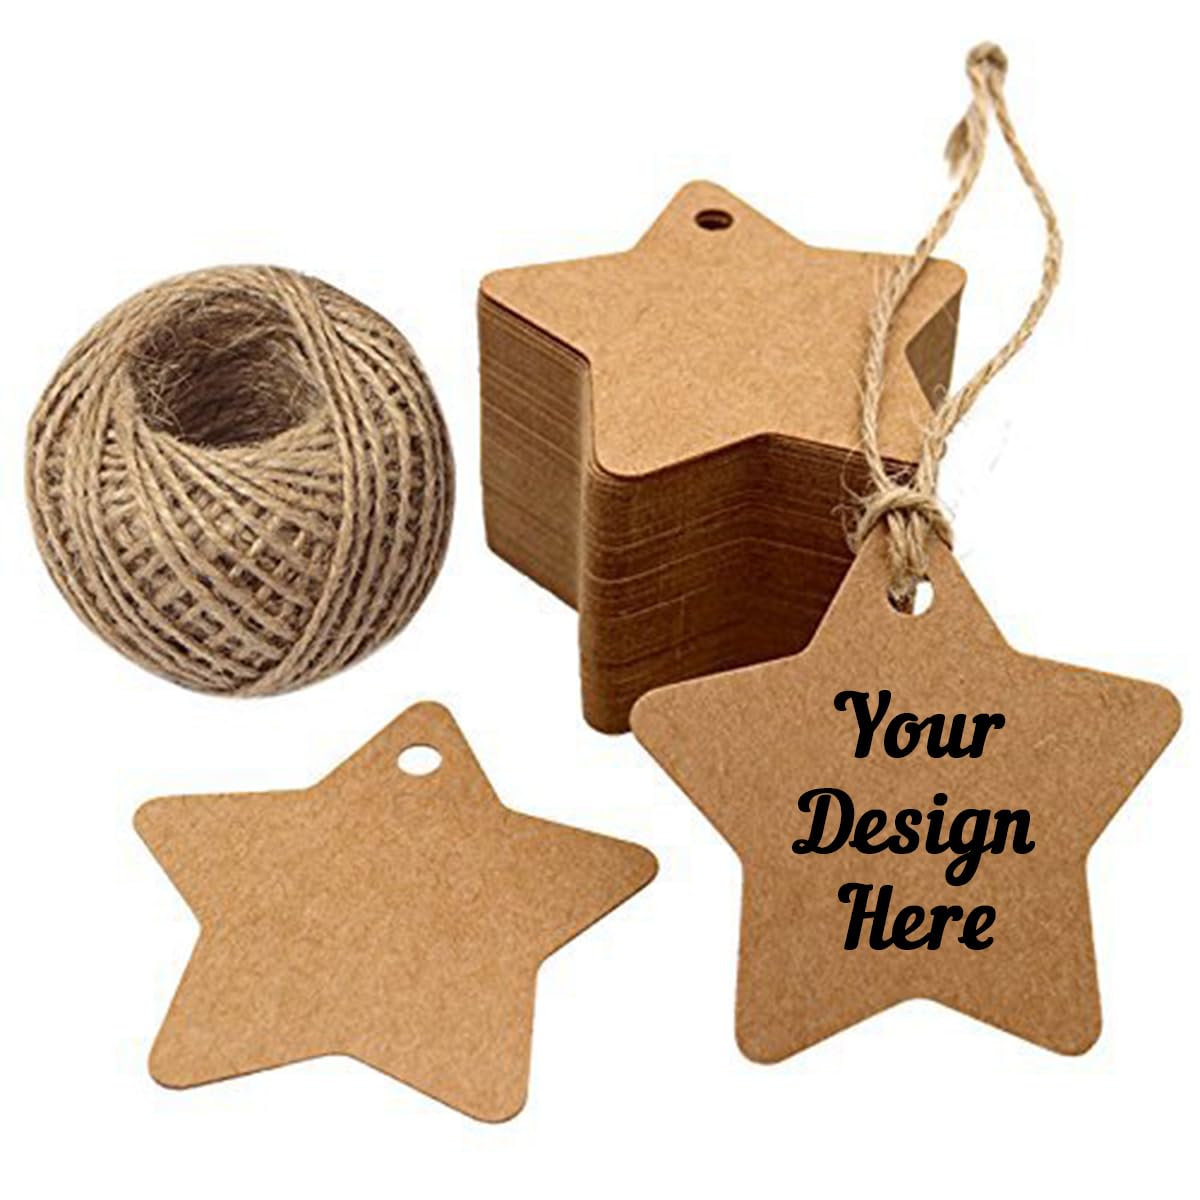 OYouni - Star Shaped Kraft Paper Gift Tags Customized - Brown - Customizable Hang Tags for Crafts, Christmas Gifts, Gift Wrapping and Clothing Tags